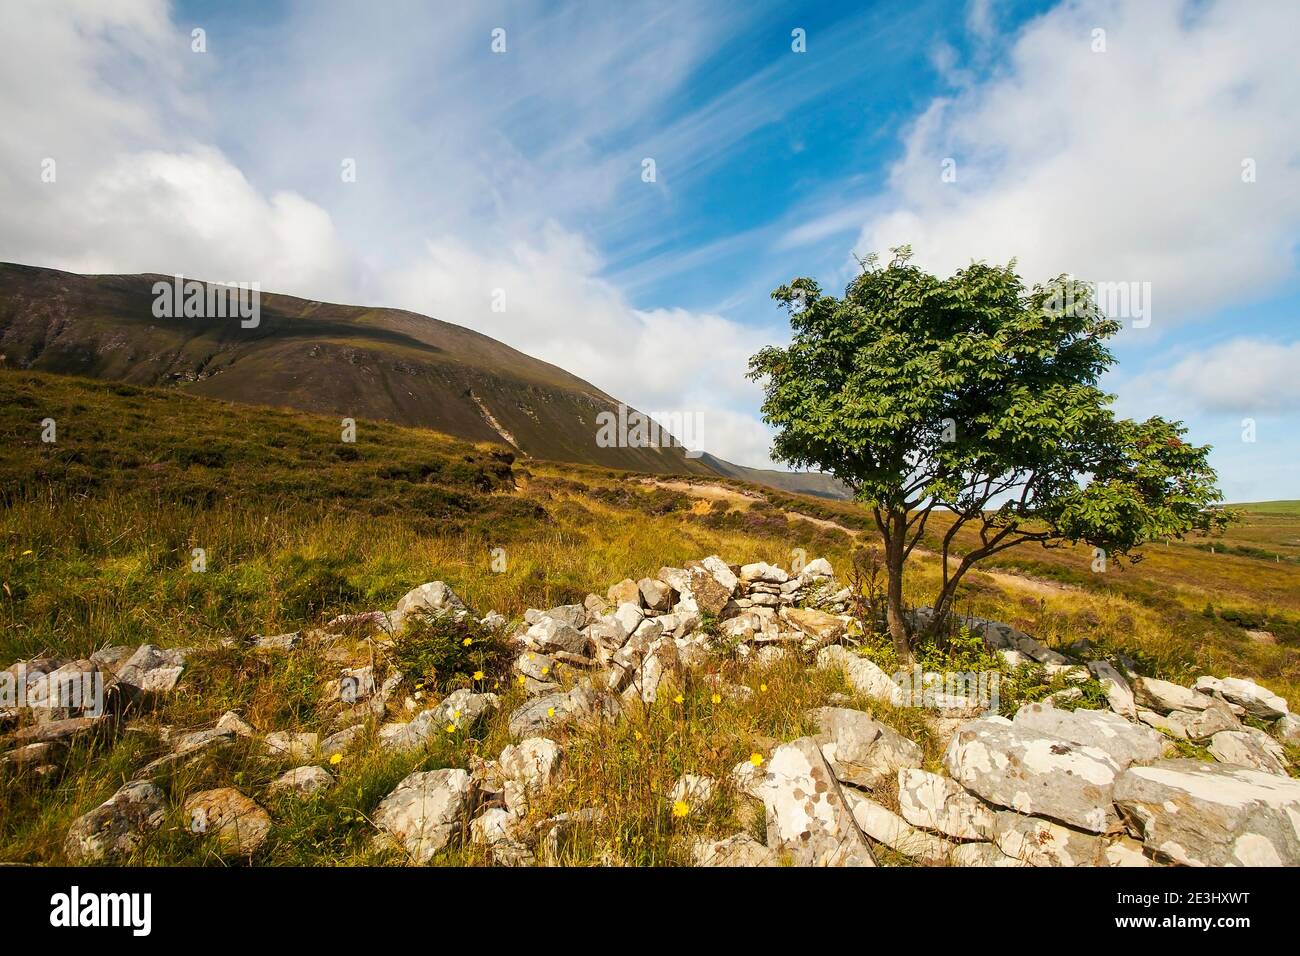 Single small tree with rocks in foreground and hill behind with blue sky with white clouds Stock Photo